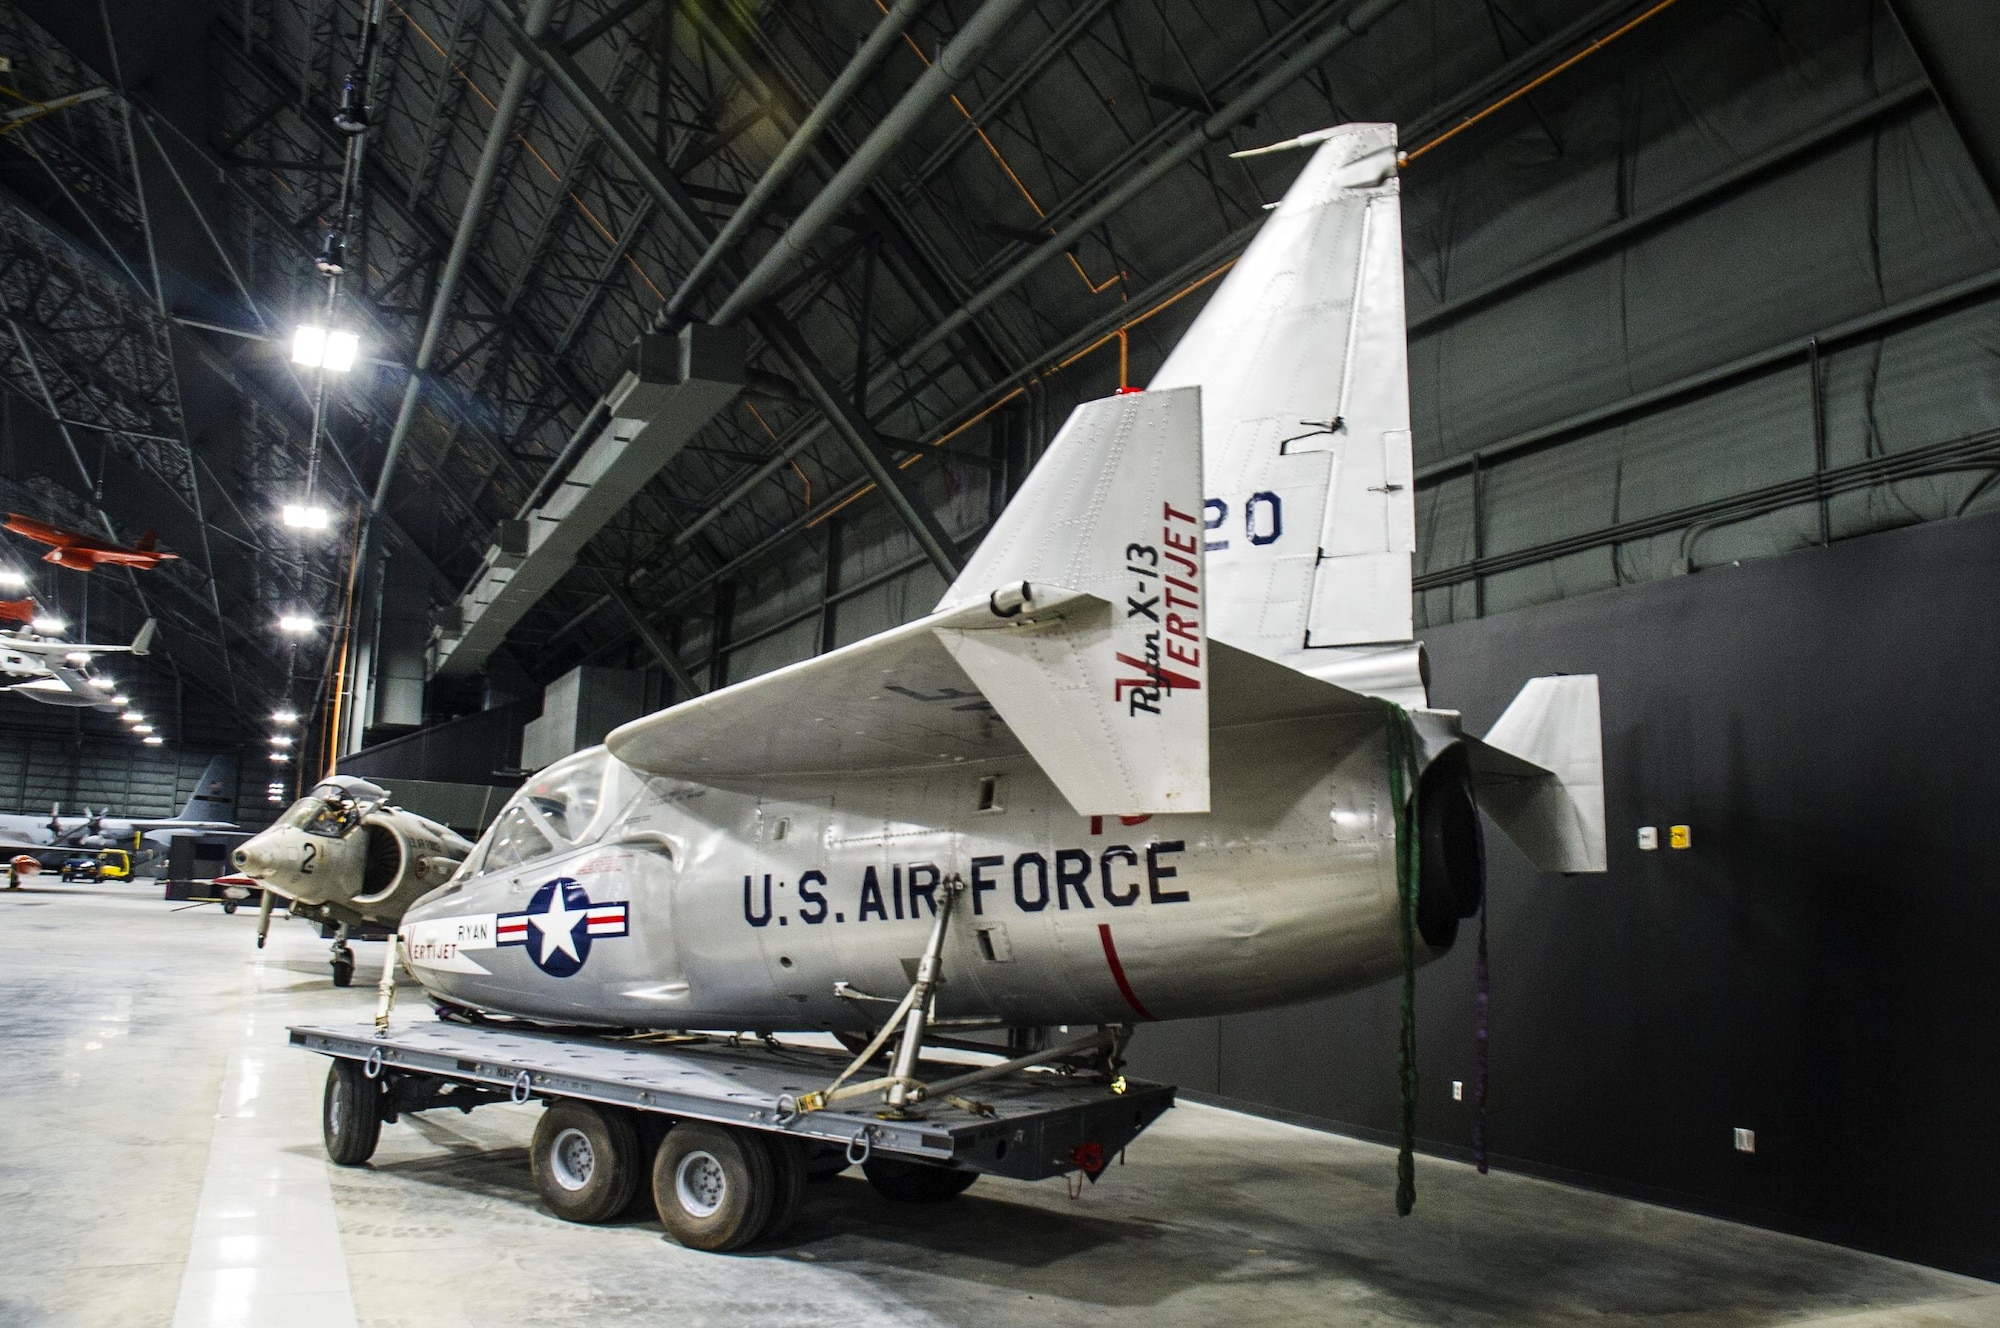 DAYTON, Ohio -- Ryan X-13 Vertijet in the Research & Development Gallery at the National Museum of the U.S. Air Force. This photo was taken during preparations for the fourth building, Feb. 2016. (U.S. Air Force photo by Ken LaRock)